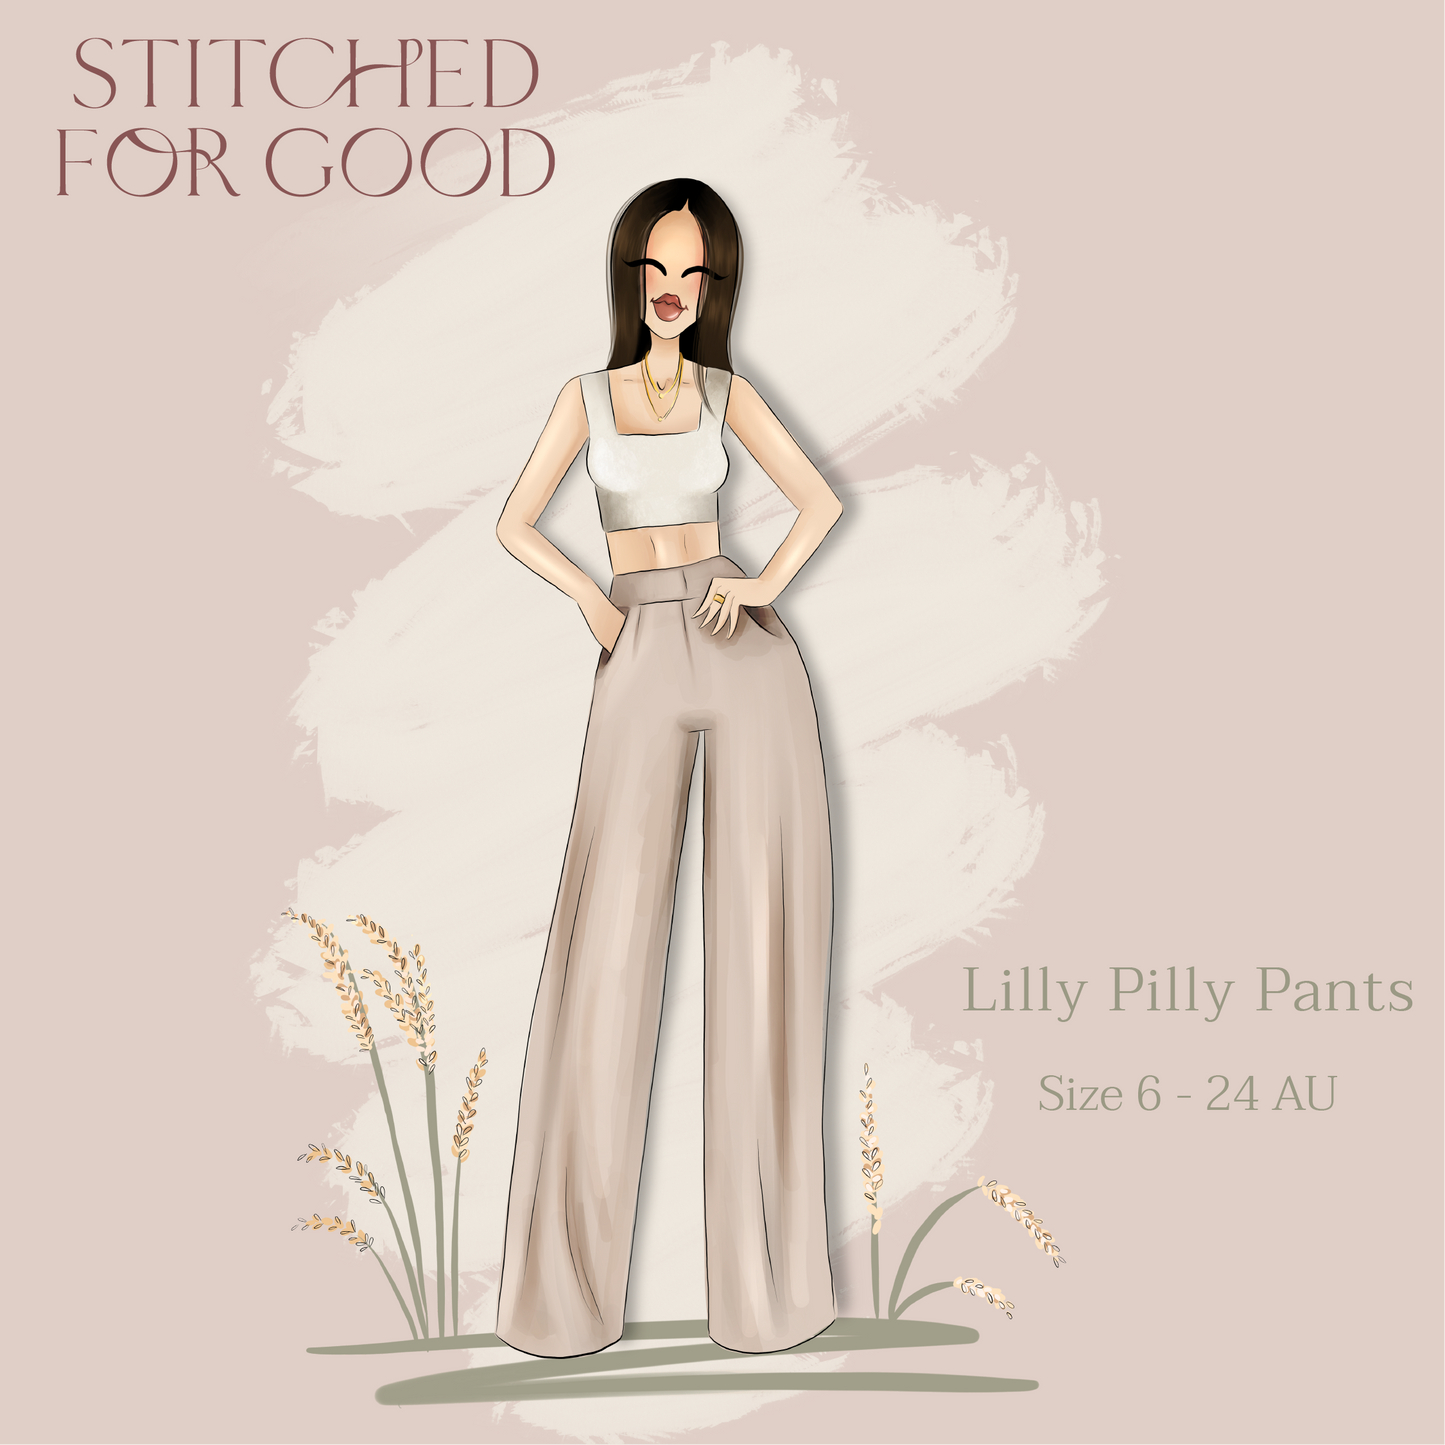 Lilly Pilly Pants